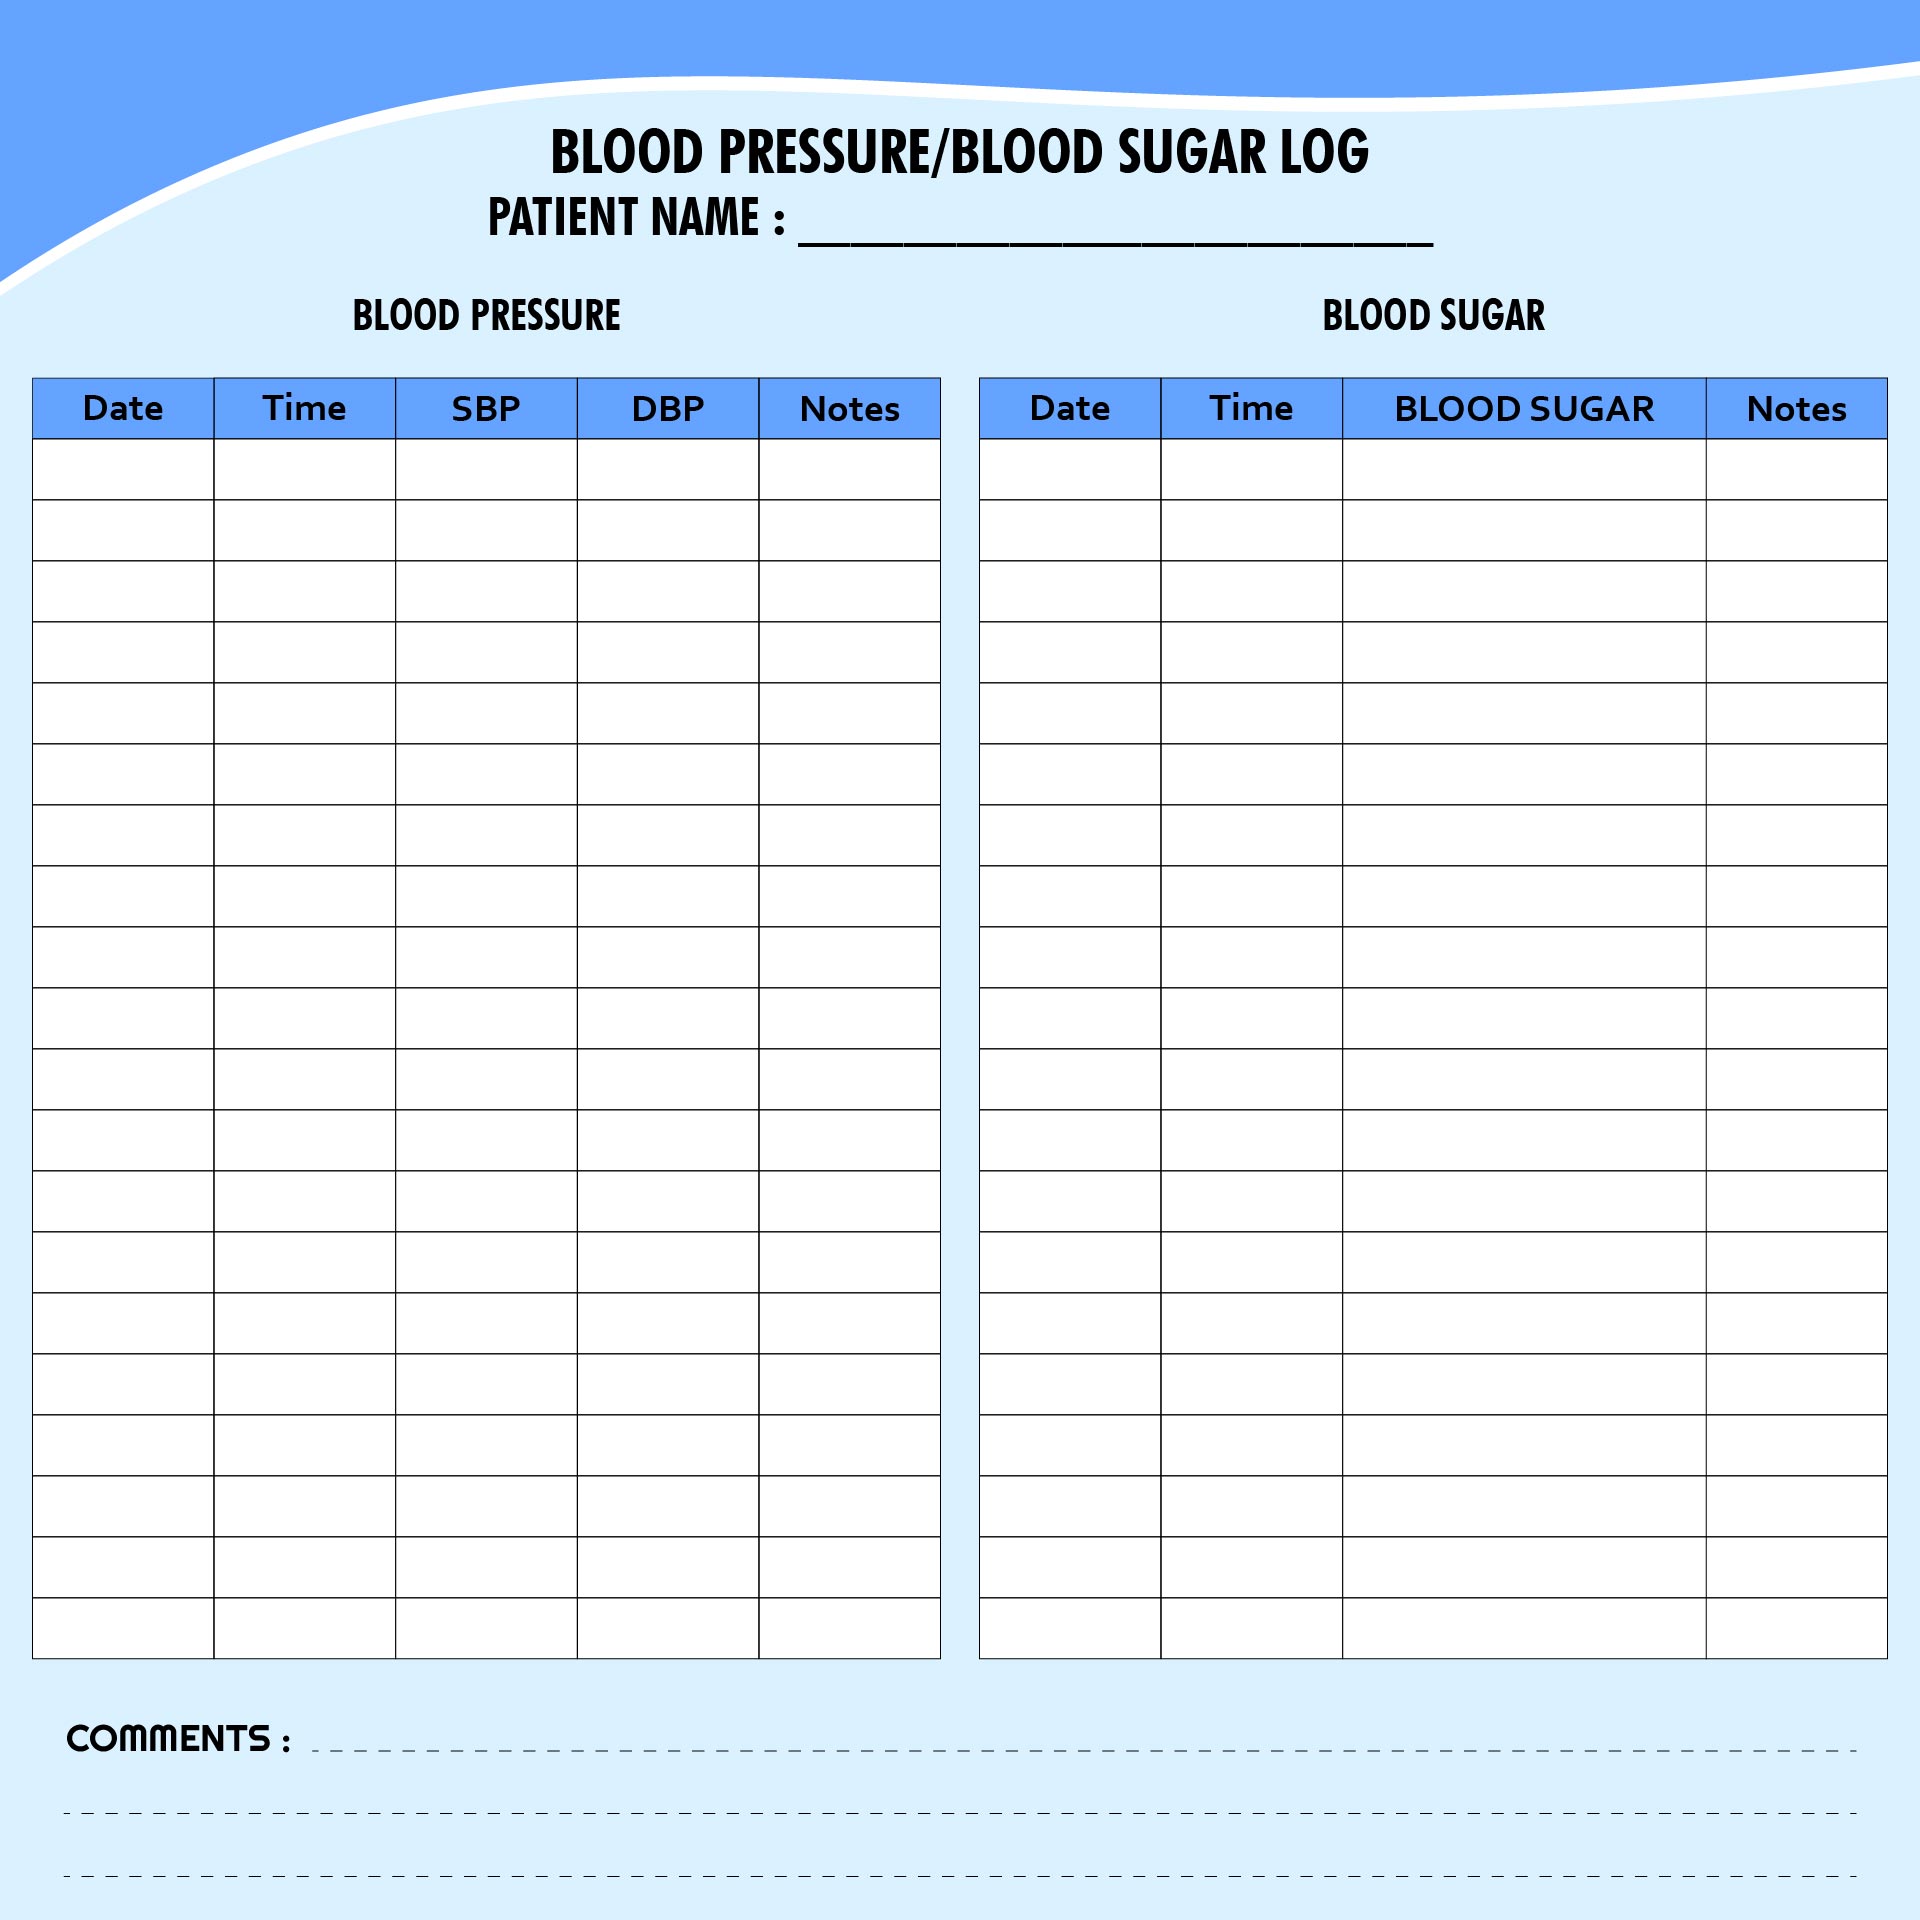 blood-sugar-log-download-free-documents-for-pdf-word-and-excel